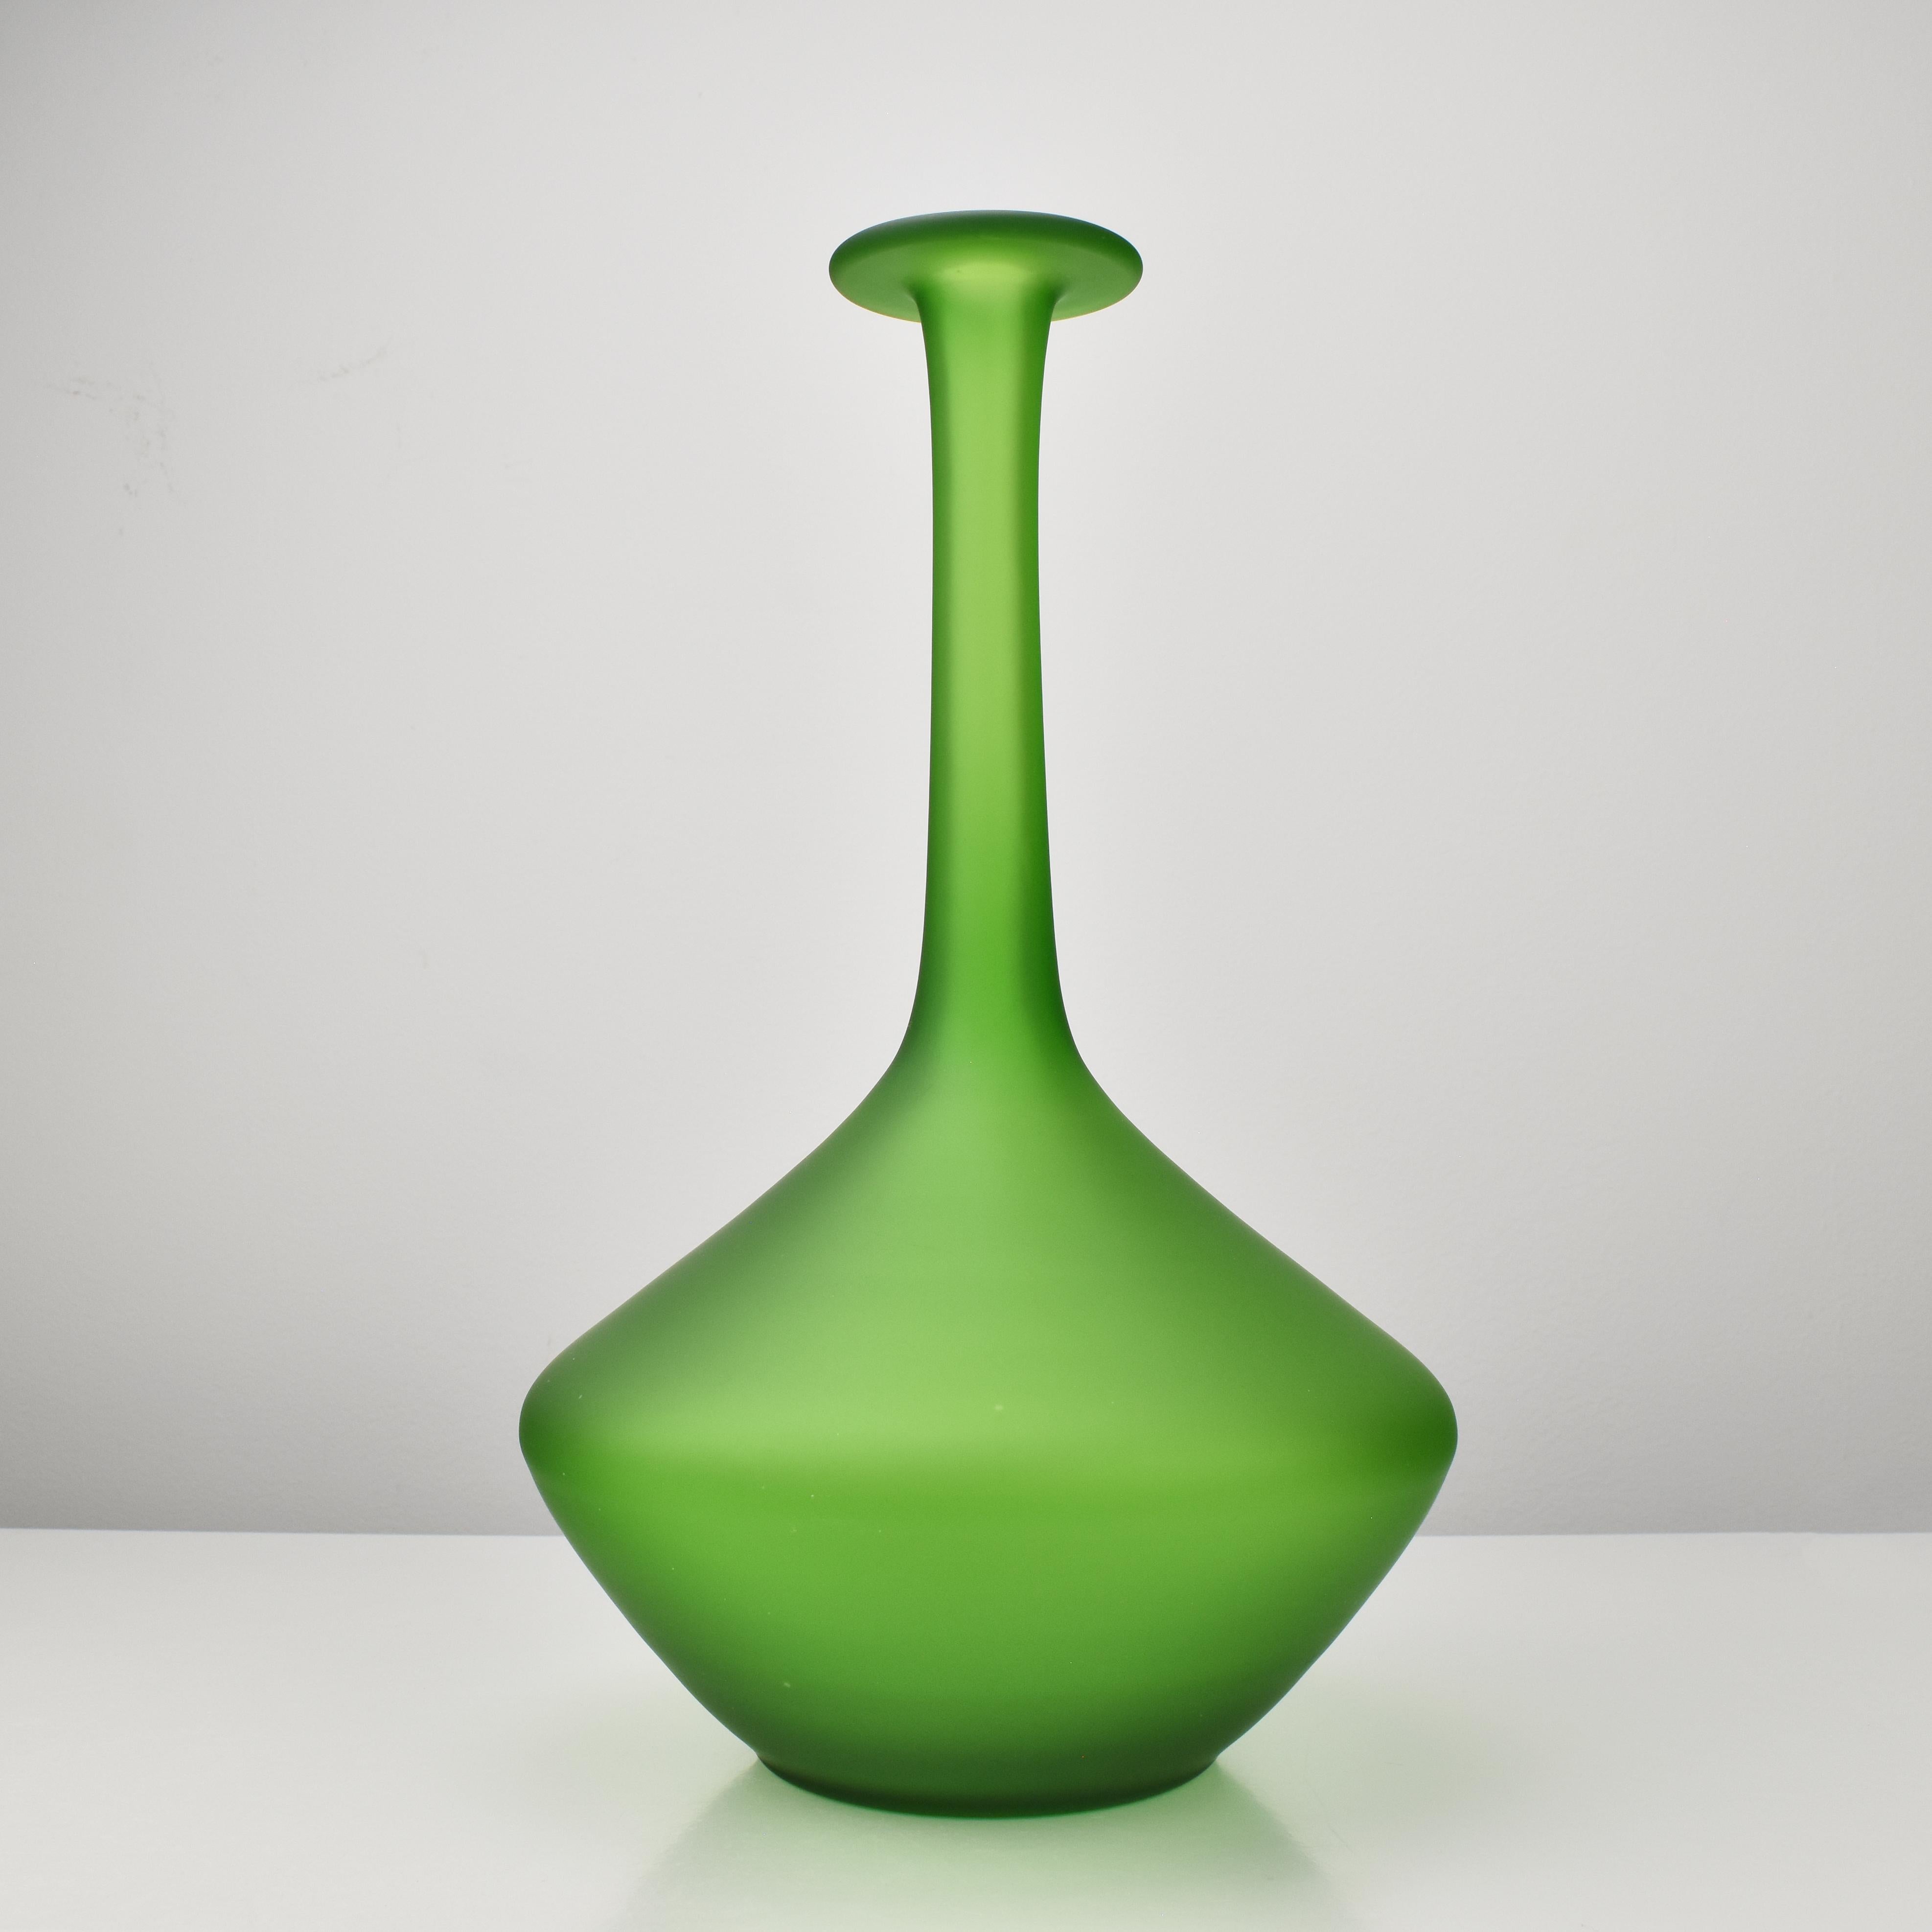 Vintage Carlo Moretti long stem soliflor vase made of vibrant green art glass with an etched surface.

Whether displayed alone as a centerpiece or filled with a single stem or branch, this long stem soliflor vase by Carlo Moretti is sure to be a